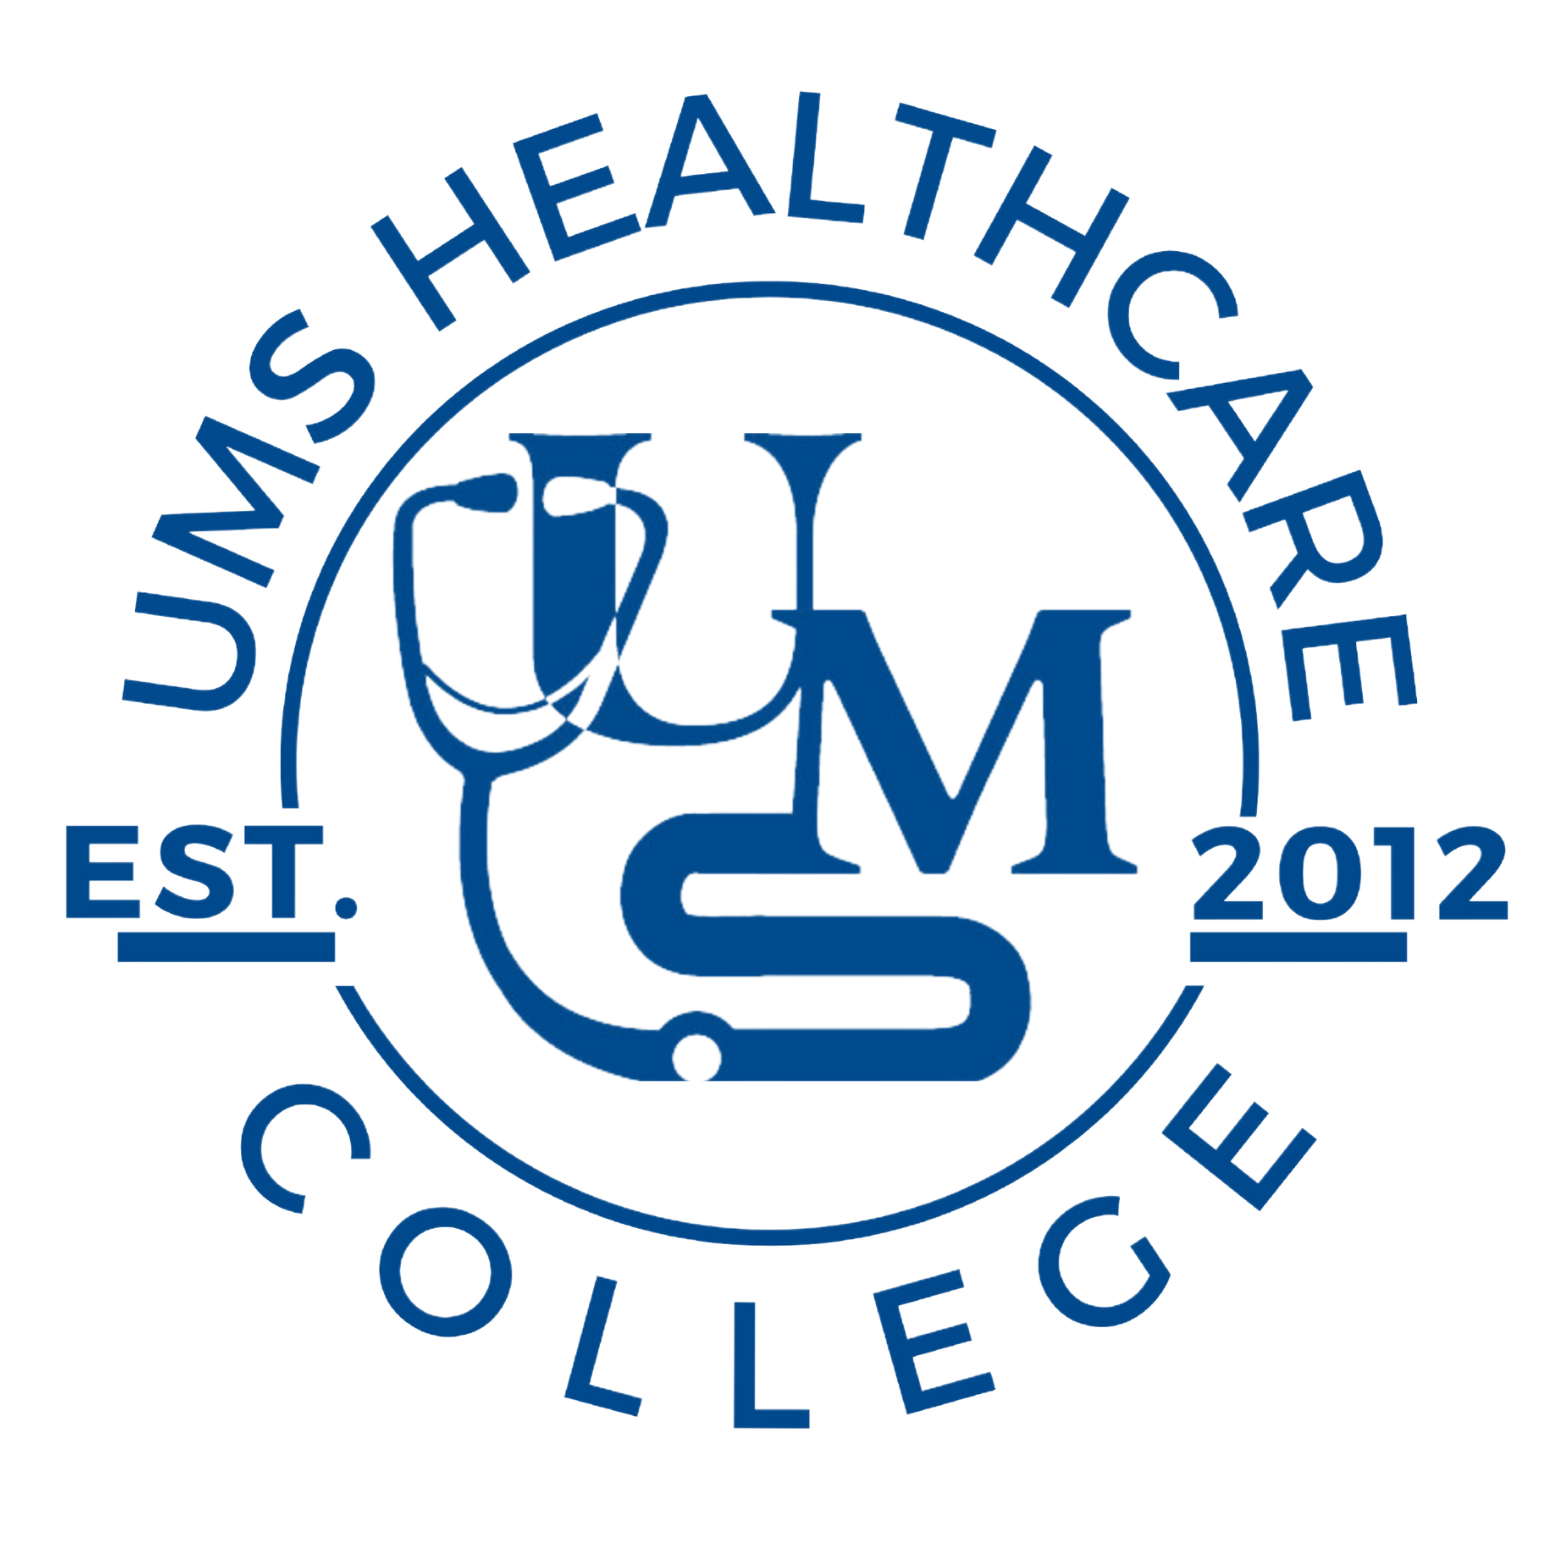 UMS Healthcare College